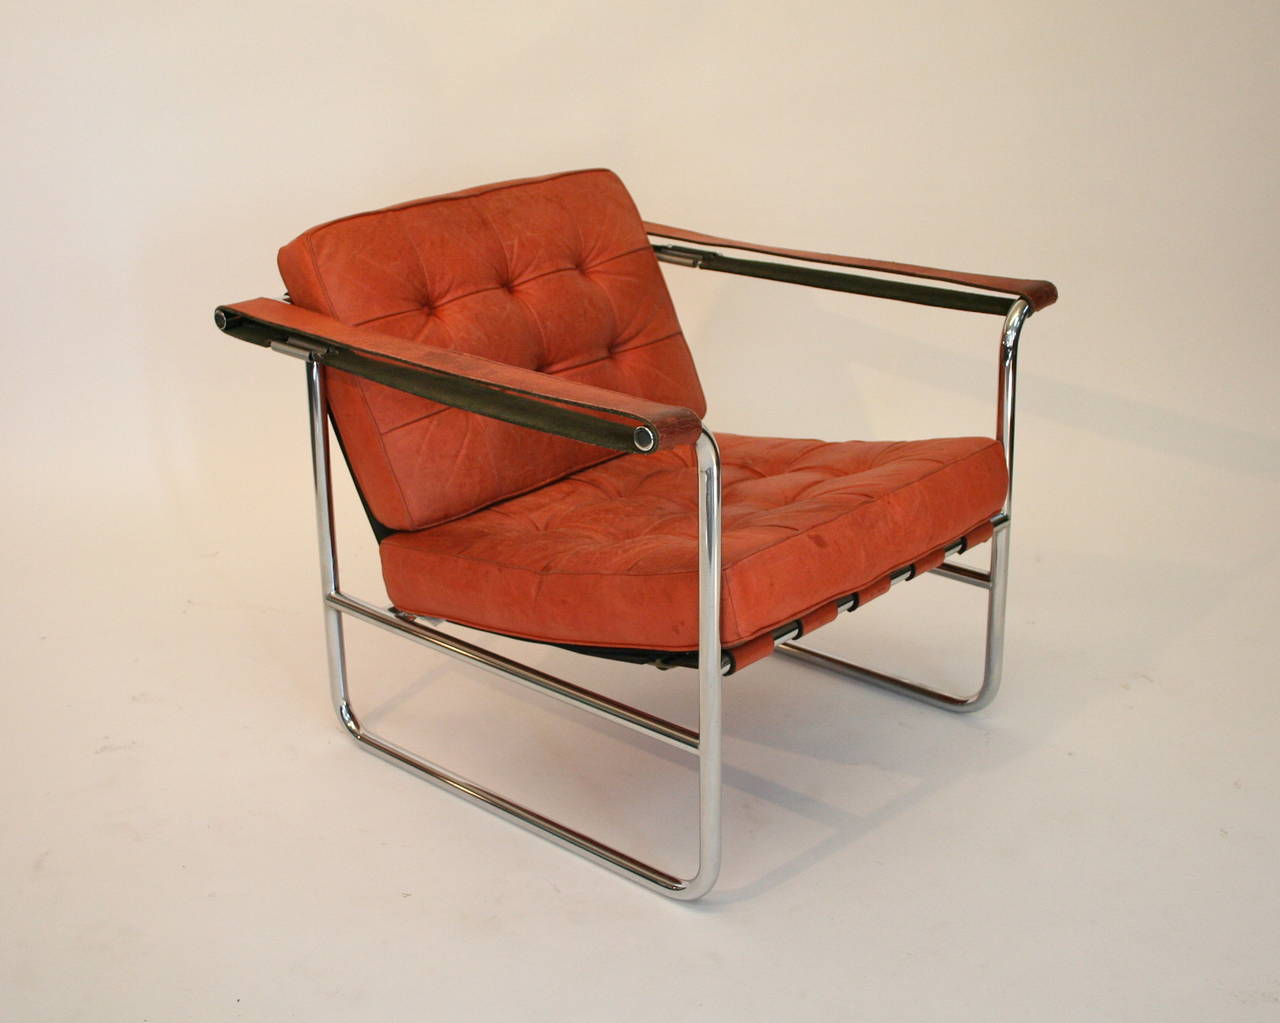 Chrome & Leather Lounge Chair by Kurt Thut for Stendig.  Tubular chrome frame in excellent condition.  Leather shows signs of wear and use.  Made in Switzerland.  Circa 1970's.